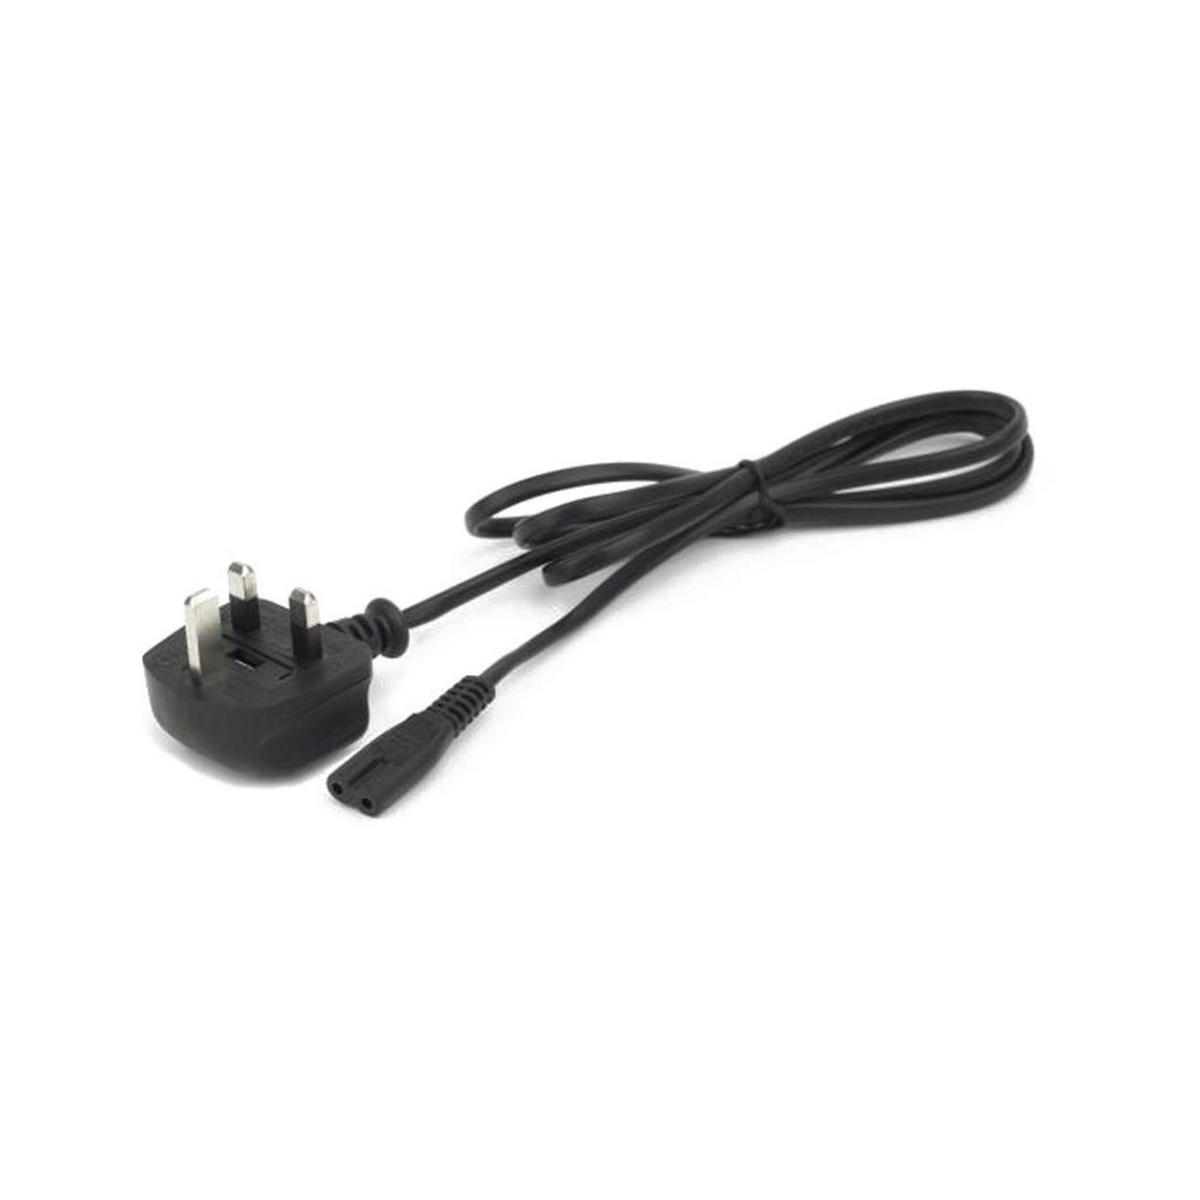 Battery charger power cable active performance uk plug